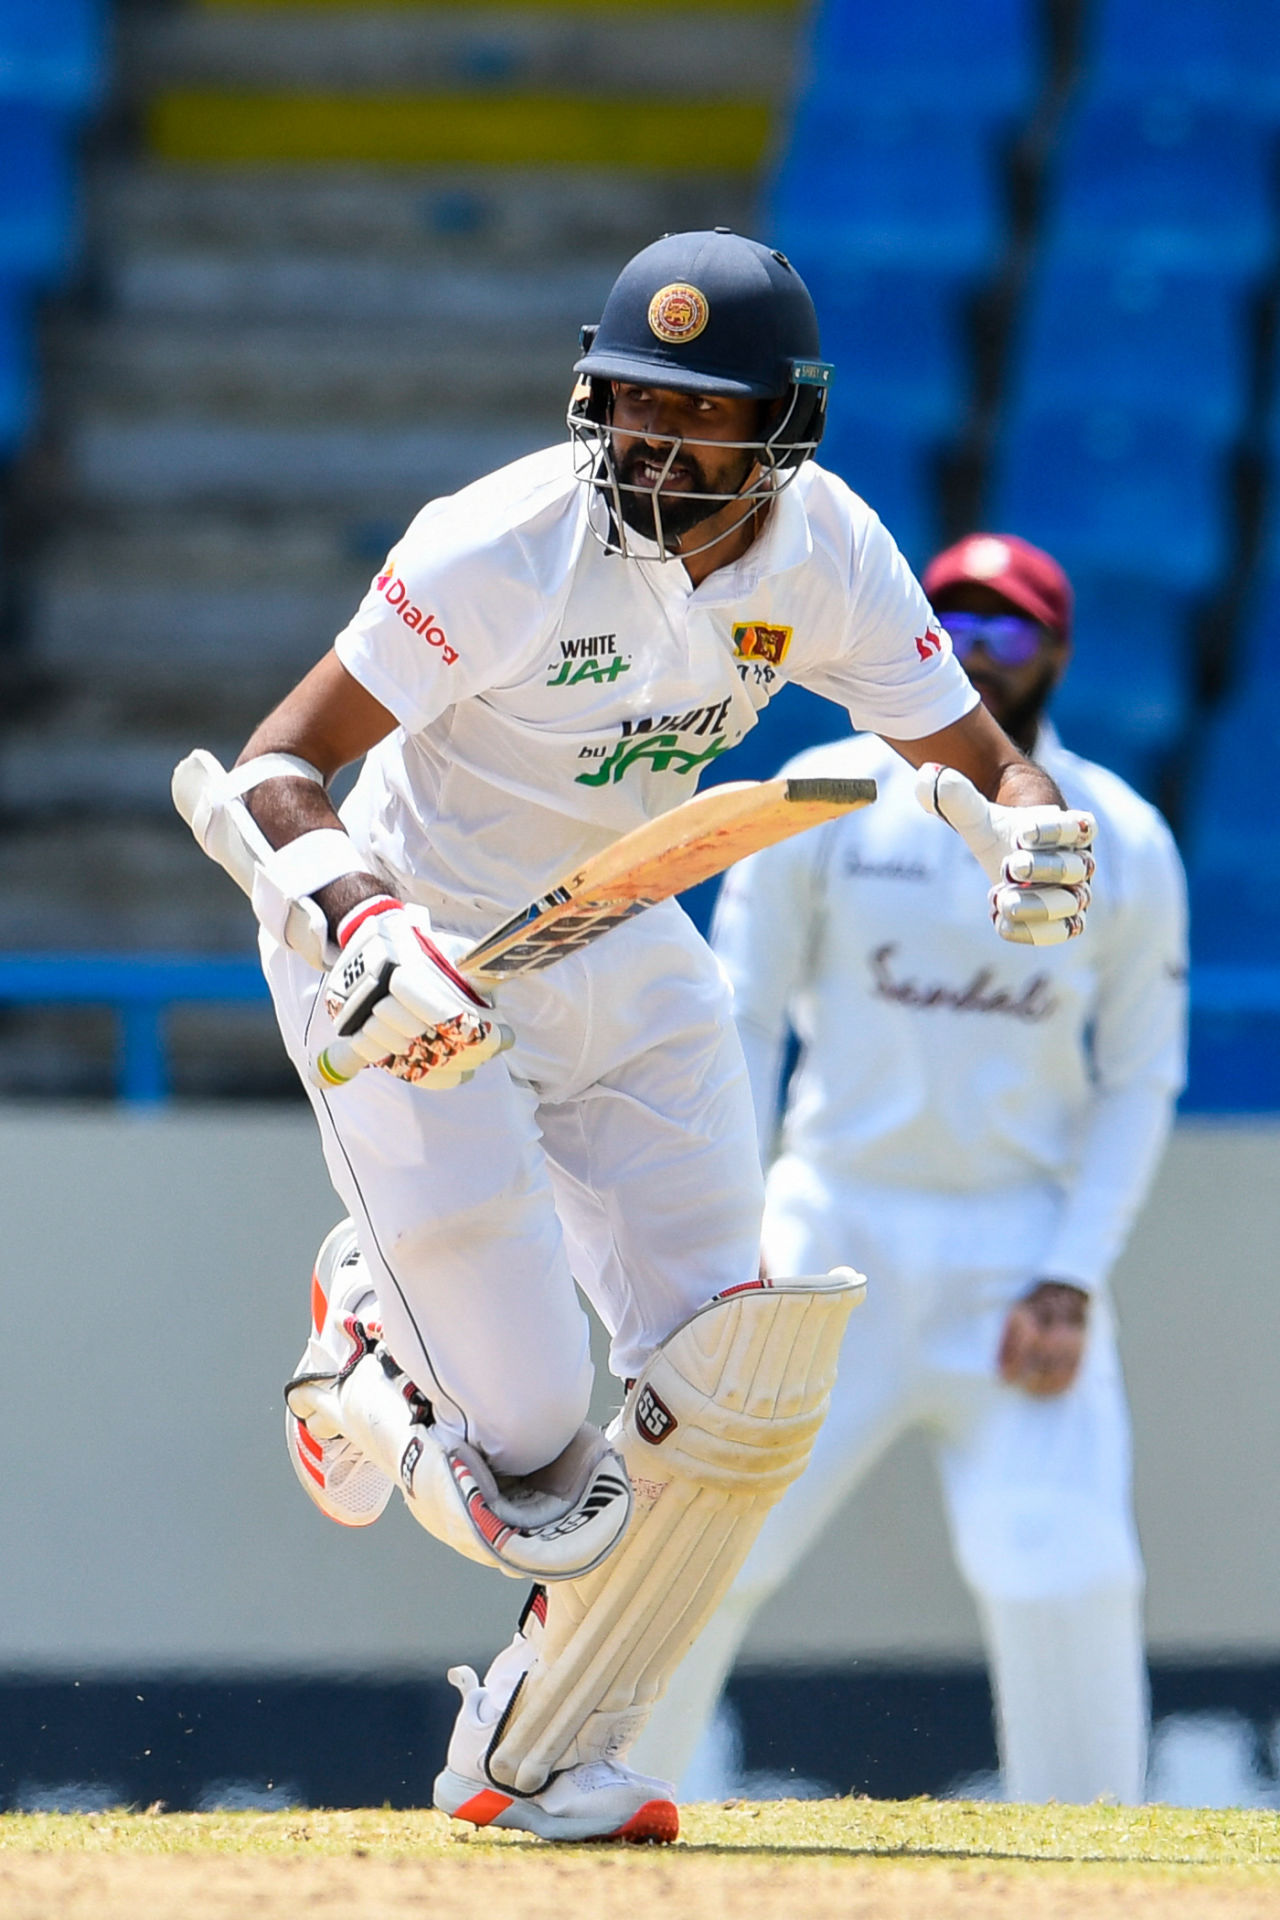 Lahiru Thirimanne sets off for a run on the way to reaching a half-century, West Indies vs Sri Lanka, 1st Test, North Sound, 1st day, March 21, 2021